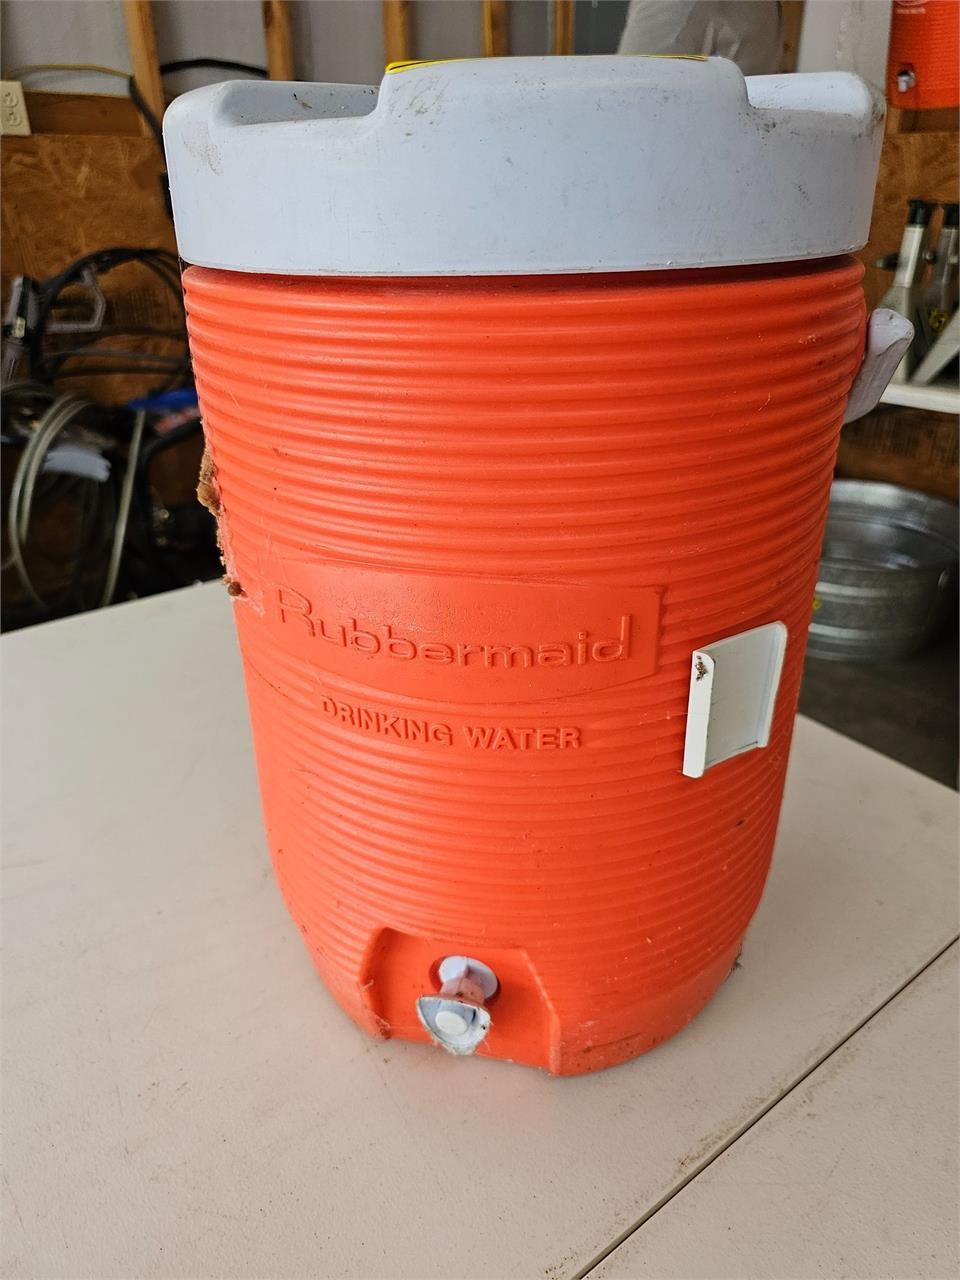 Rubbermade Drinking water cooler